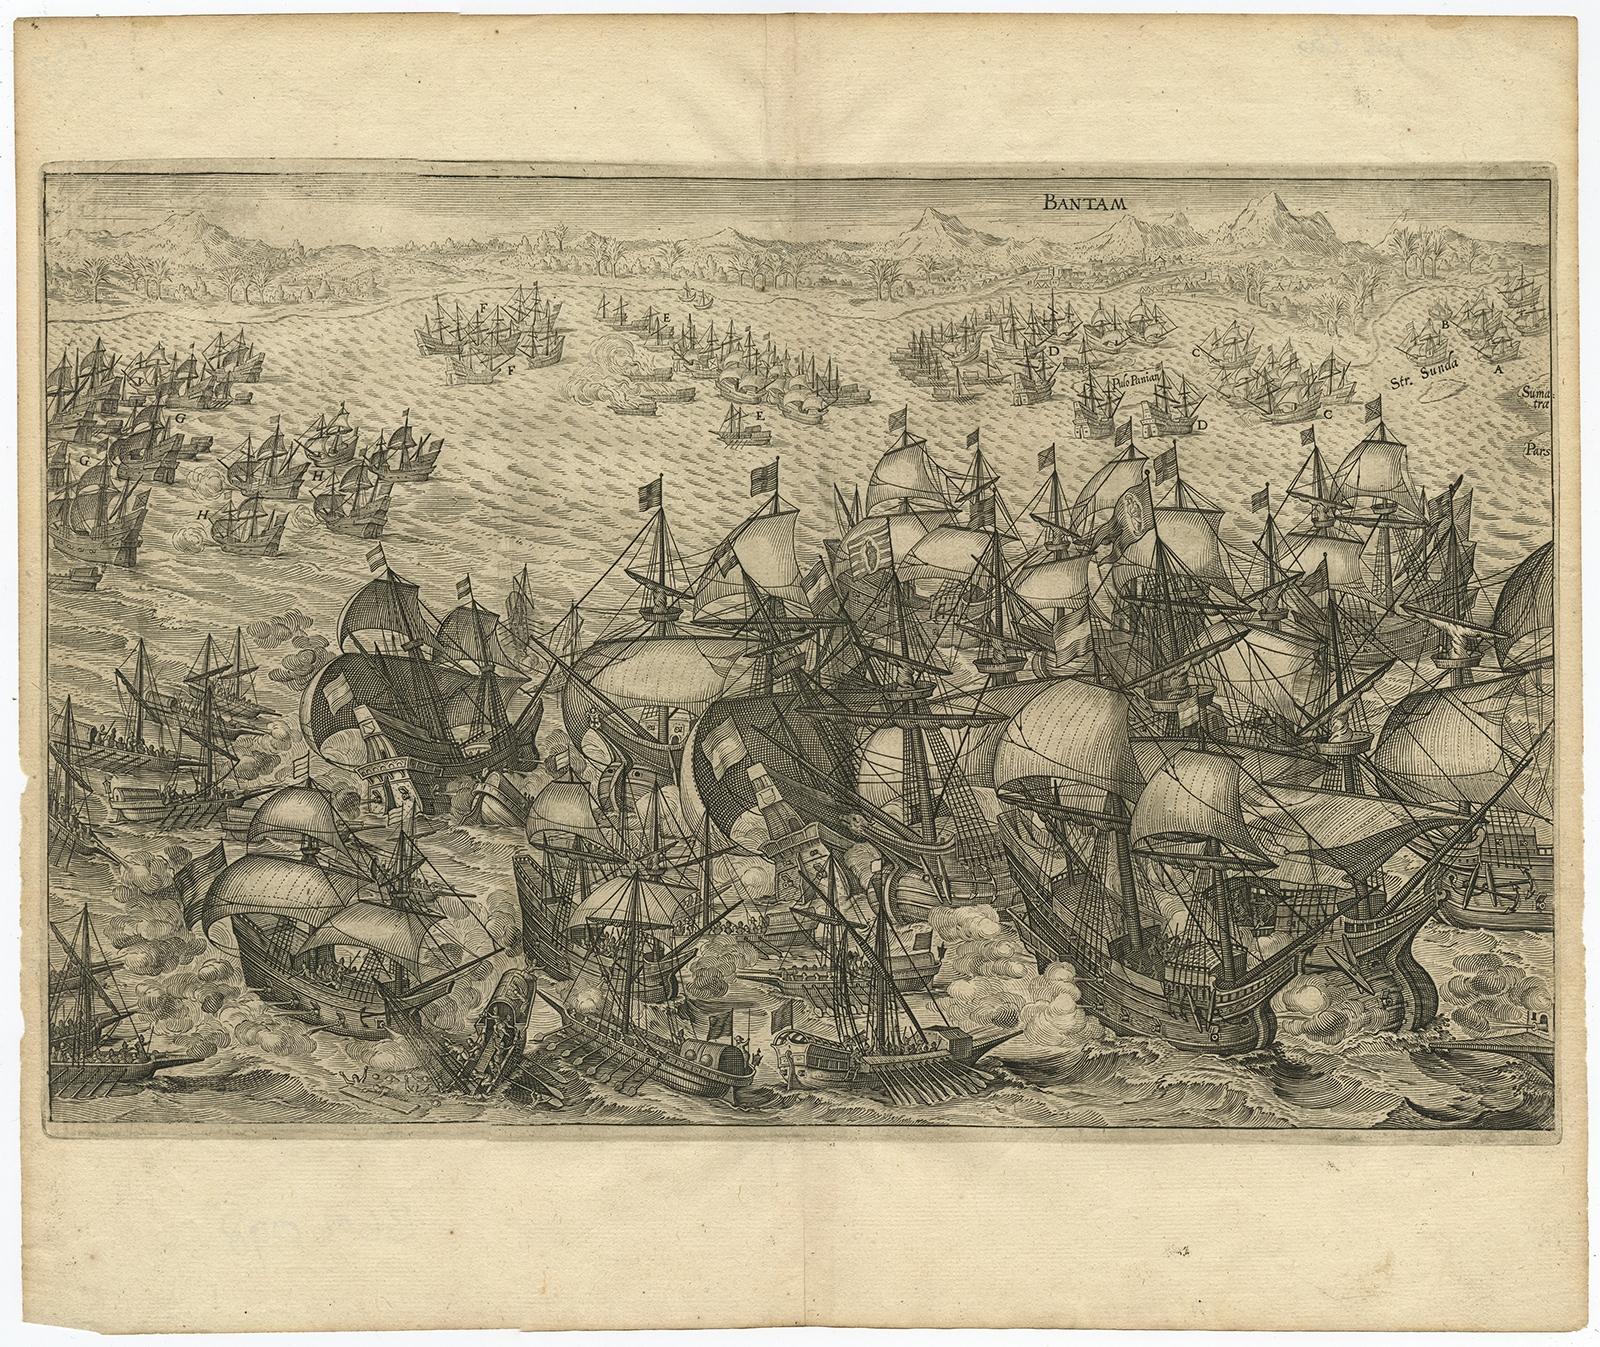 Antique print titled 'Bantam'. 

Copper engraving of the Dutch attack on the Portuguese fleet off Bantam in 1601 depicted as the victory of Admiral Wolfert Harmensz and his 5 ships over 30 Portuguese ships. The ships in the battle include the